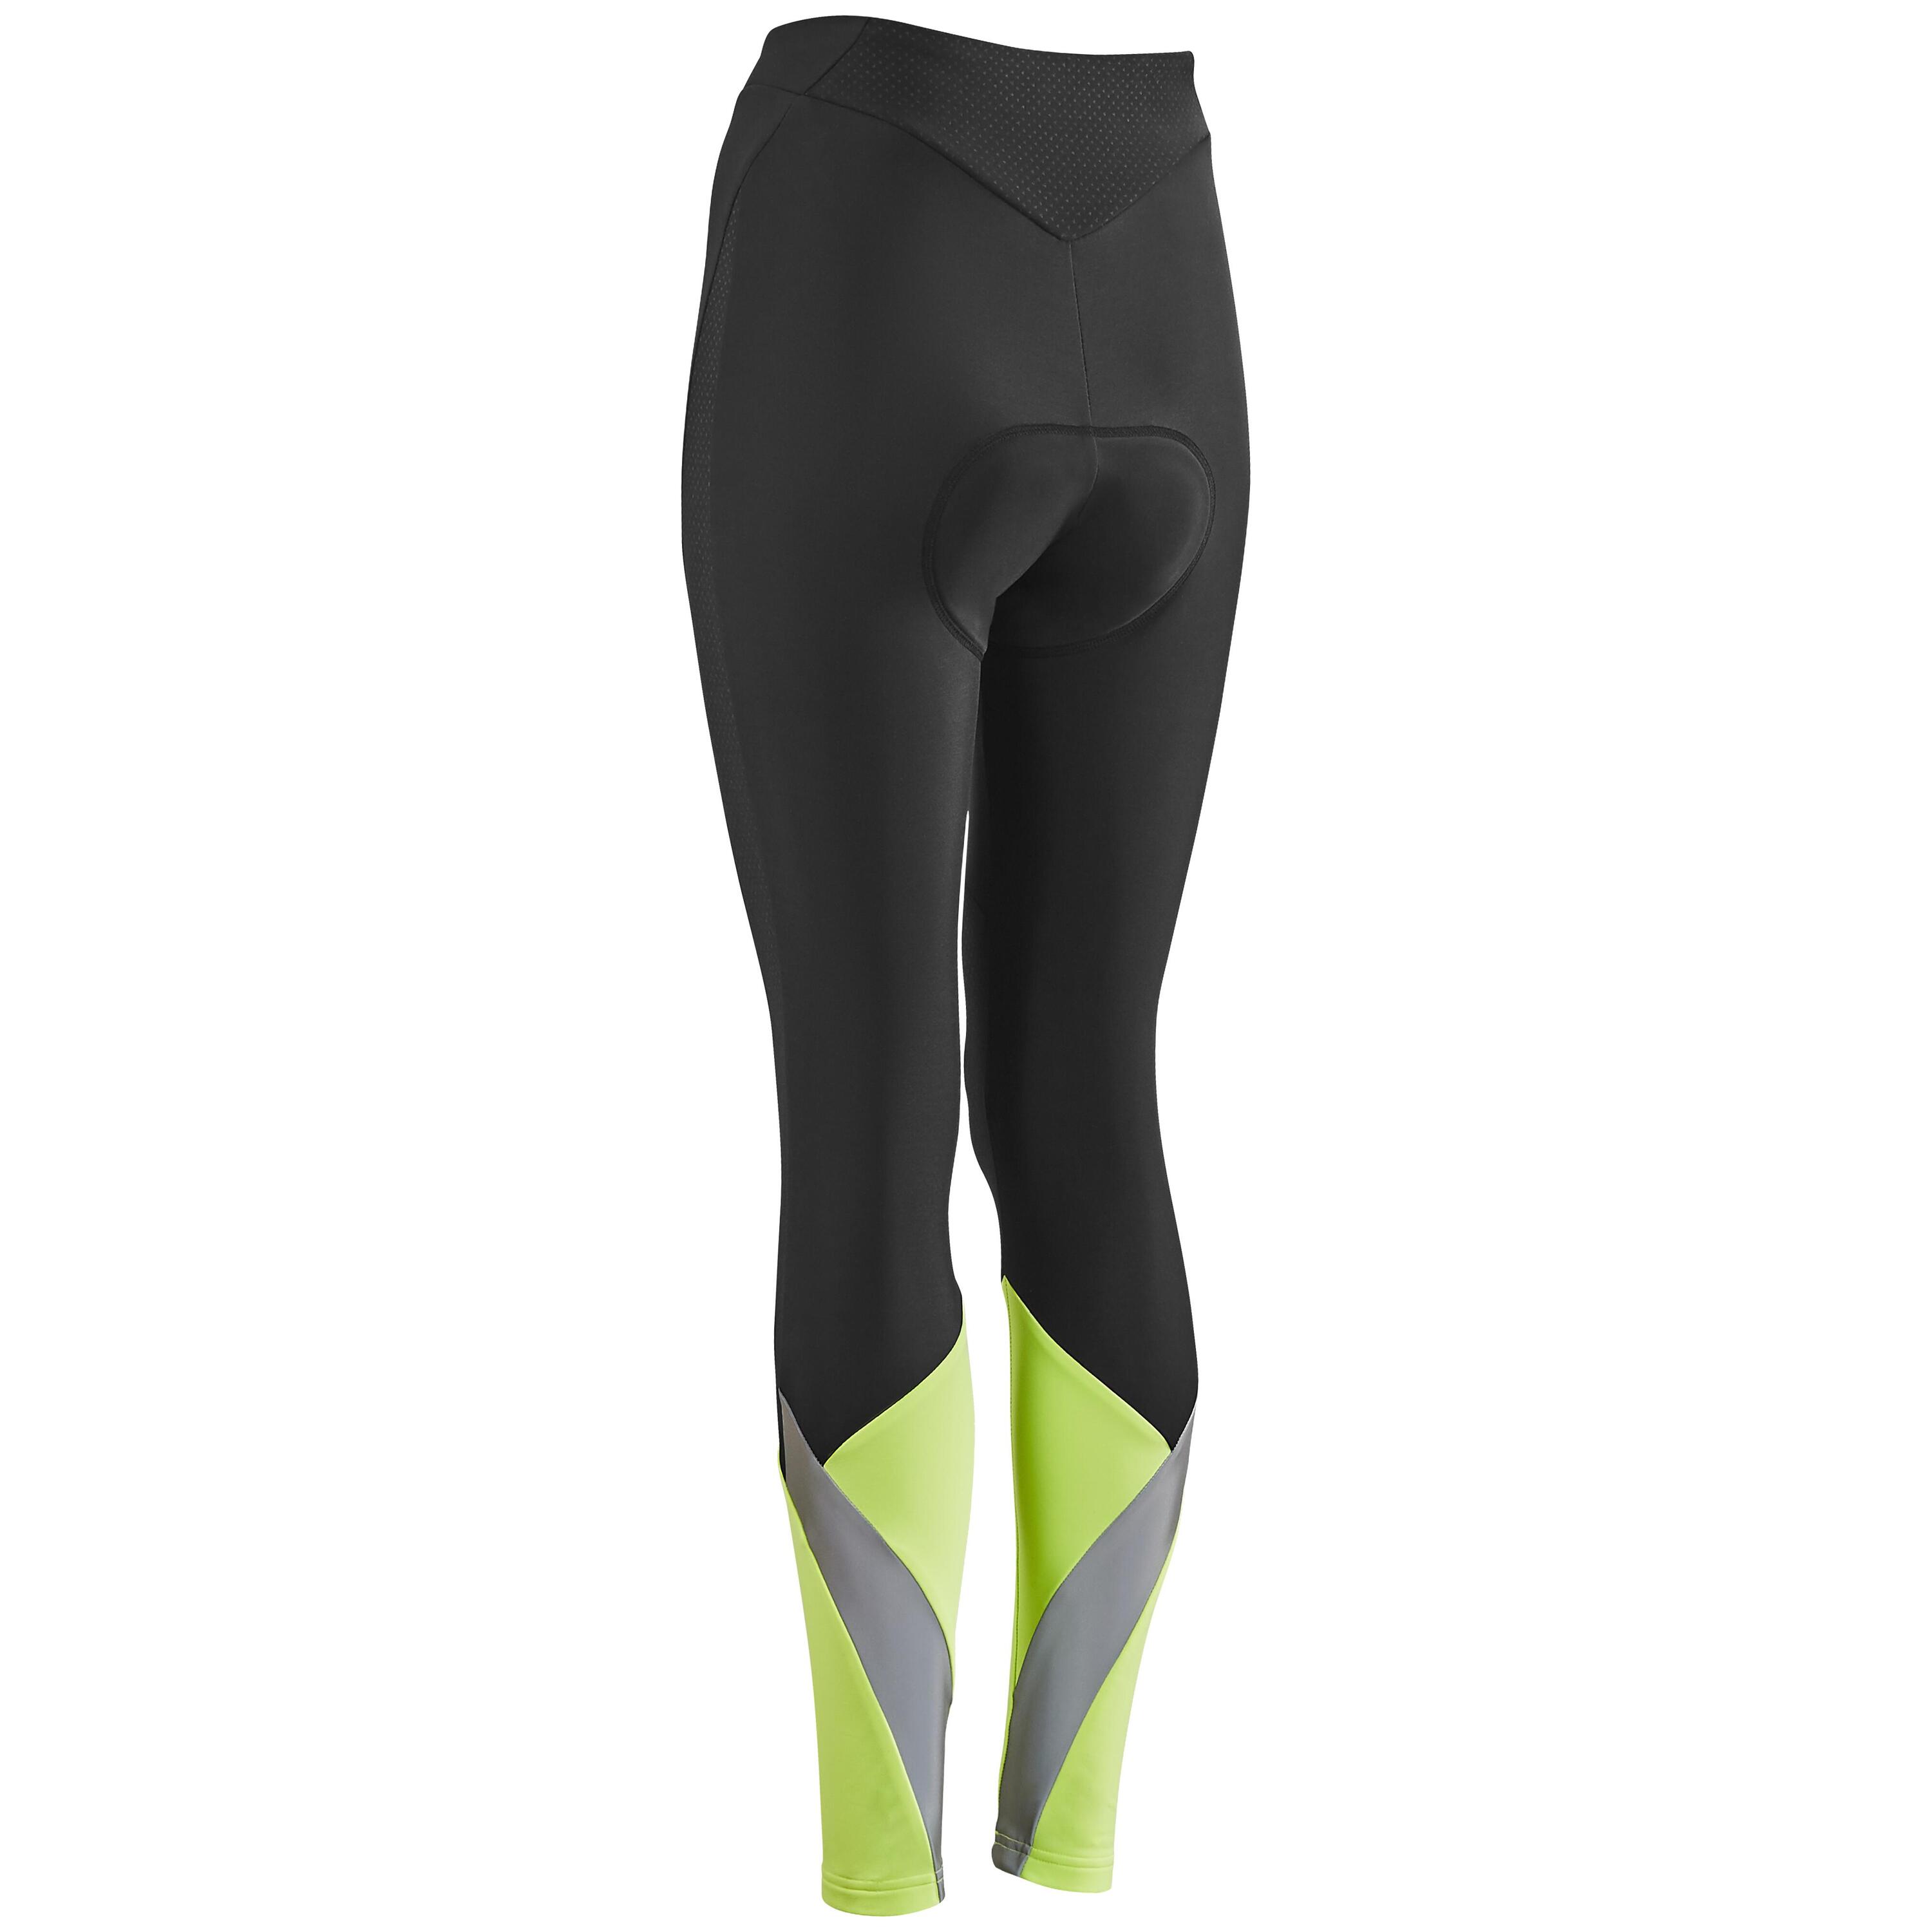 Women's Winter Cycling Tights 2/3